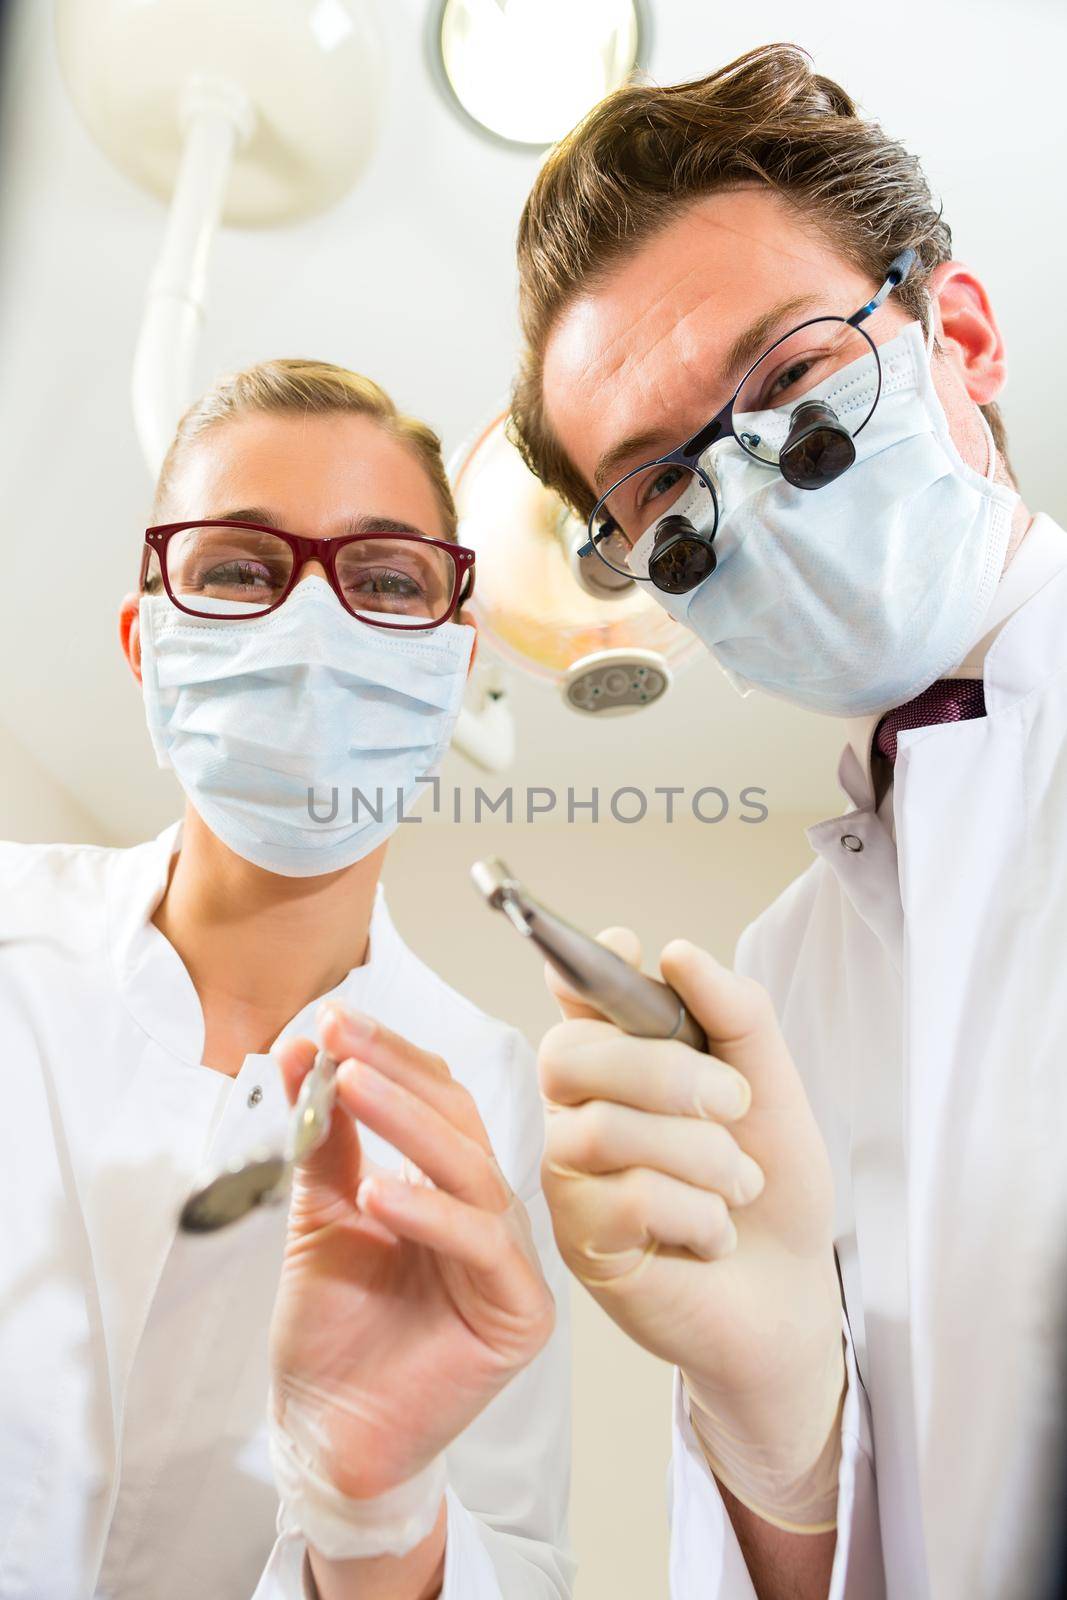 treatment at dentist from perspective of patient by Kzenon